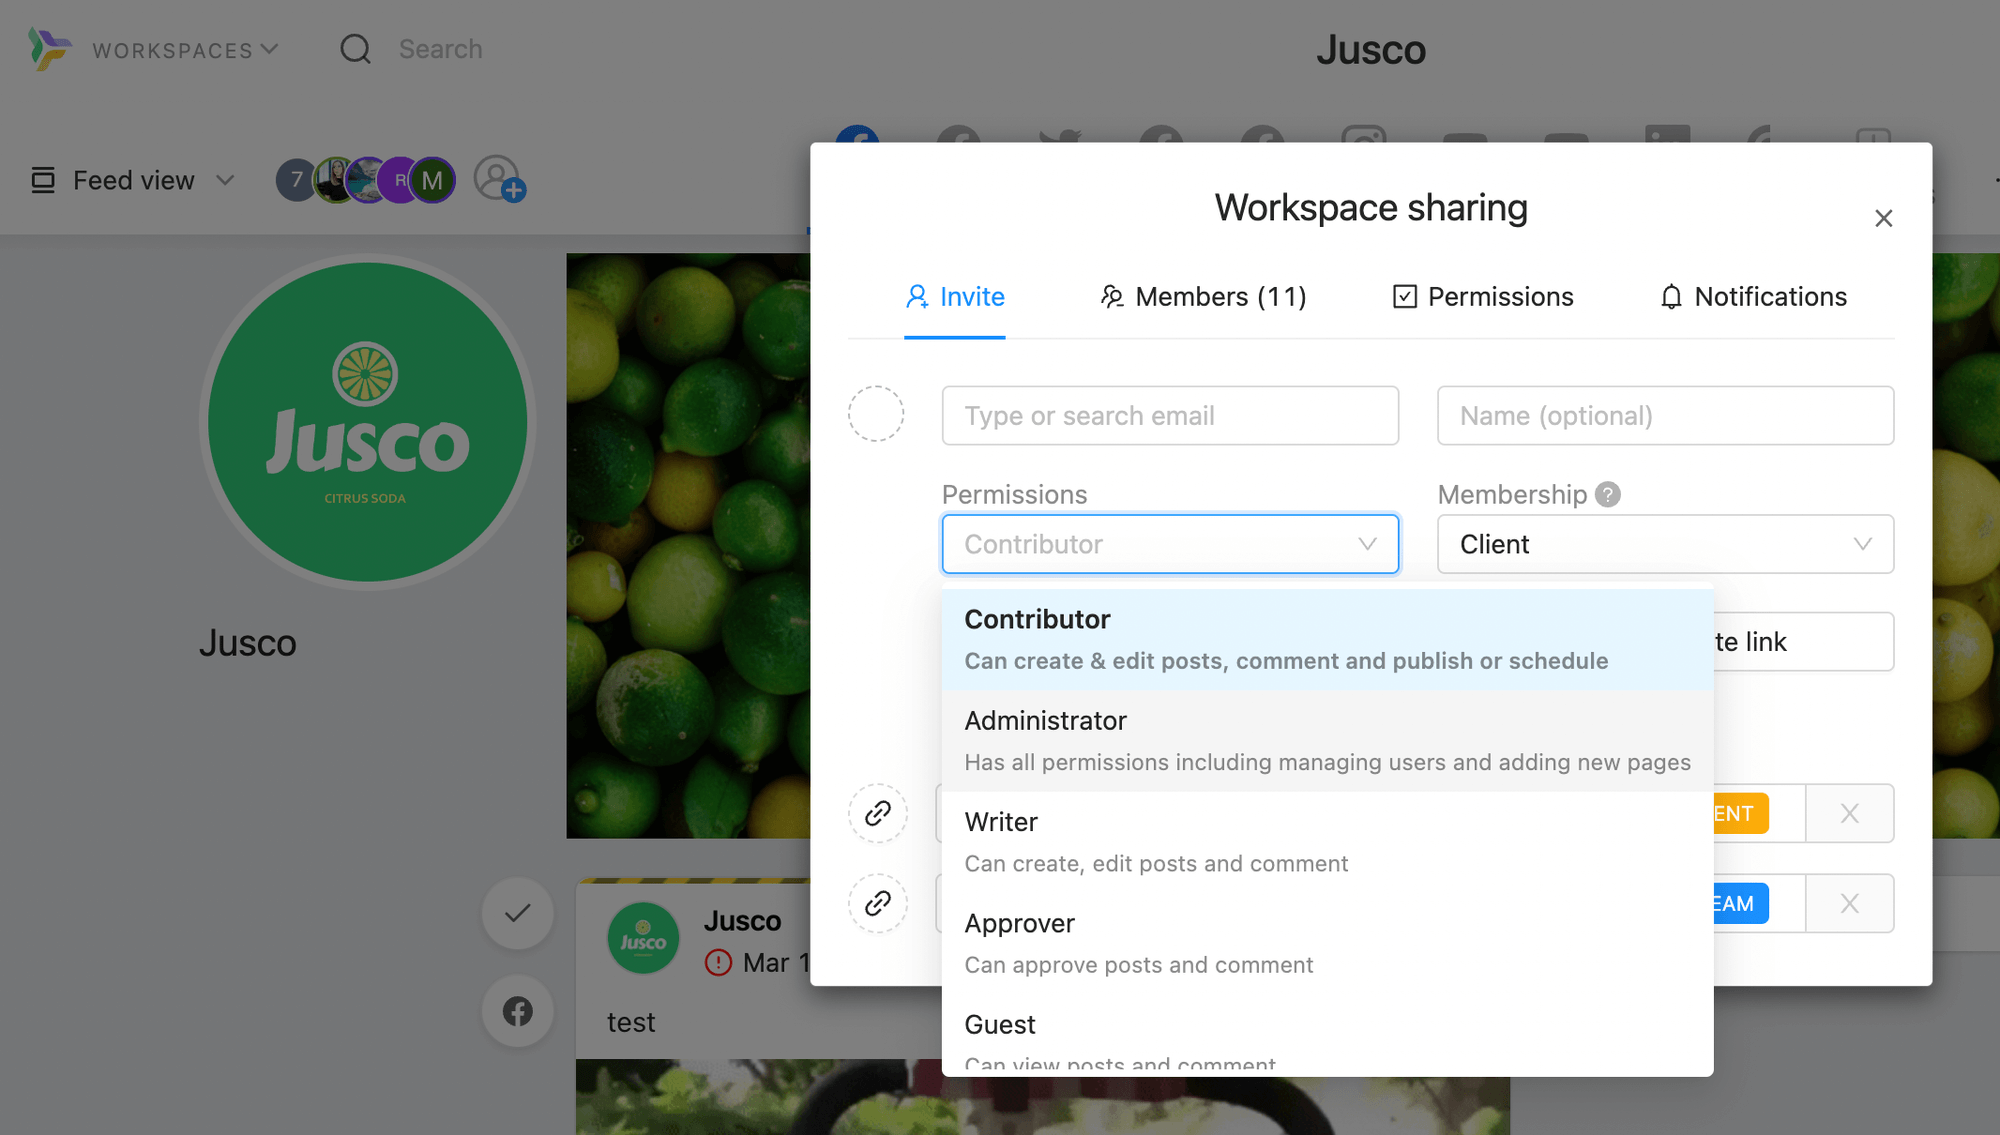 Workspace sharing settings in Planable, showing options to assign roles like Contributor, Administrator, and other permissions.